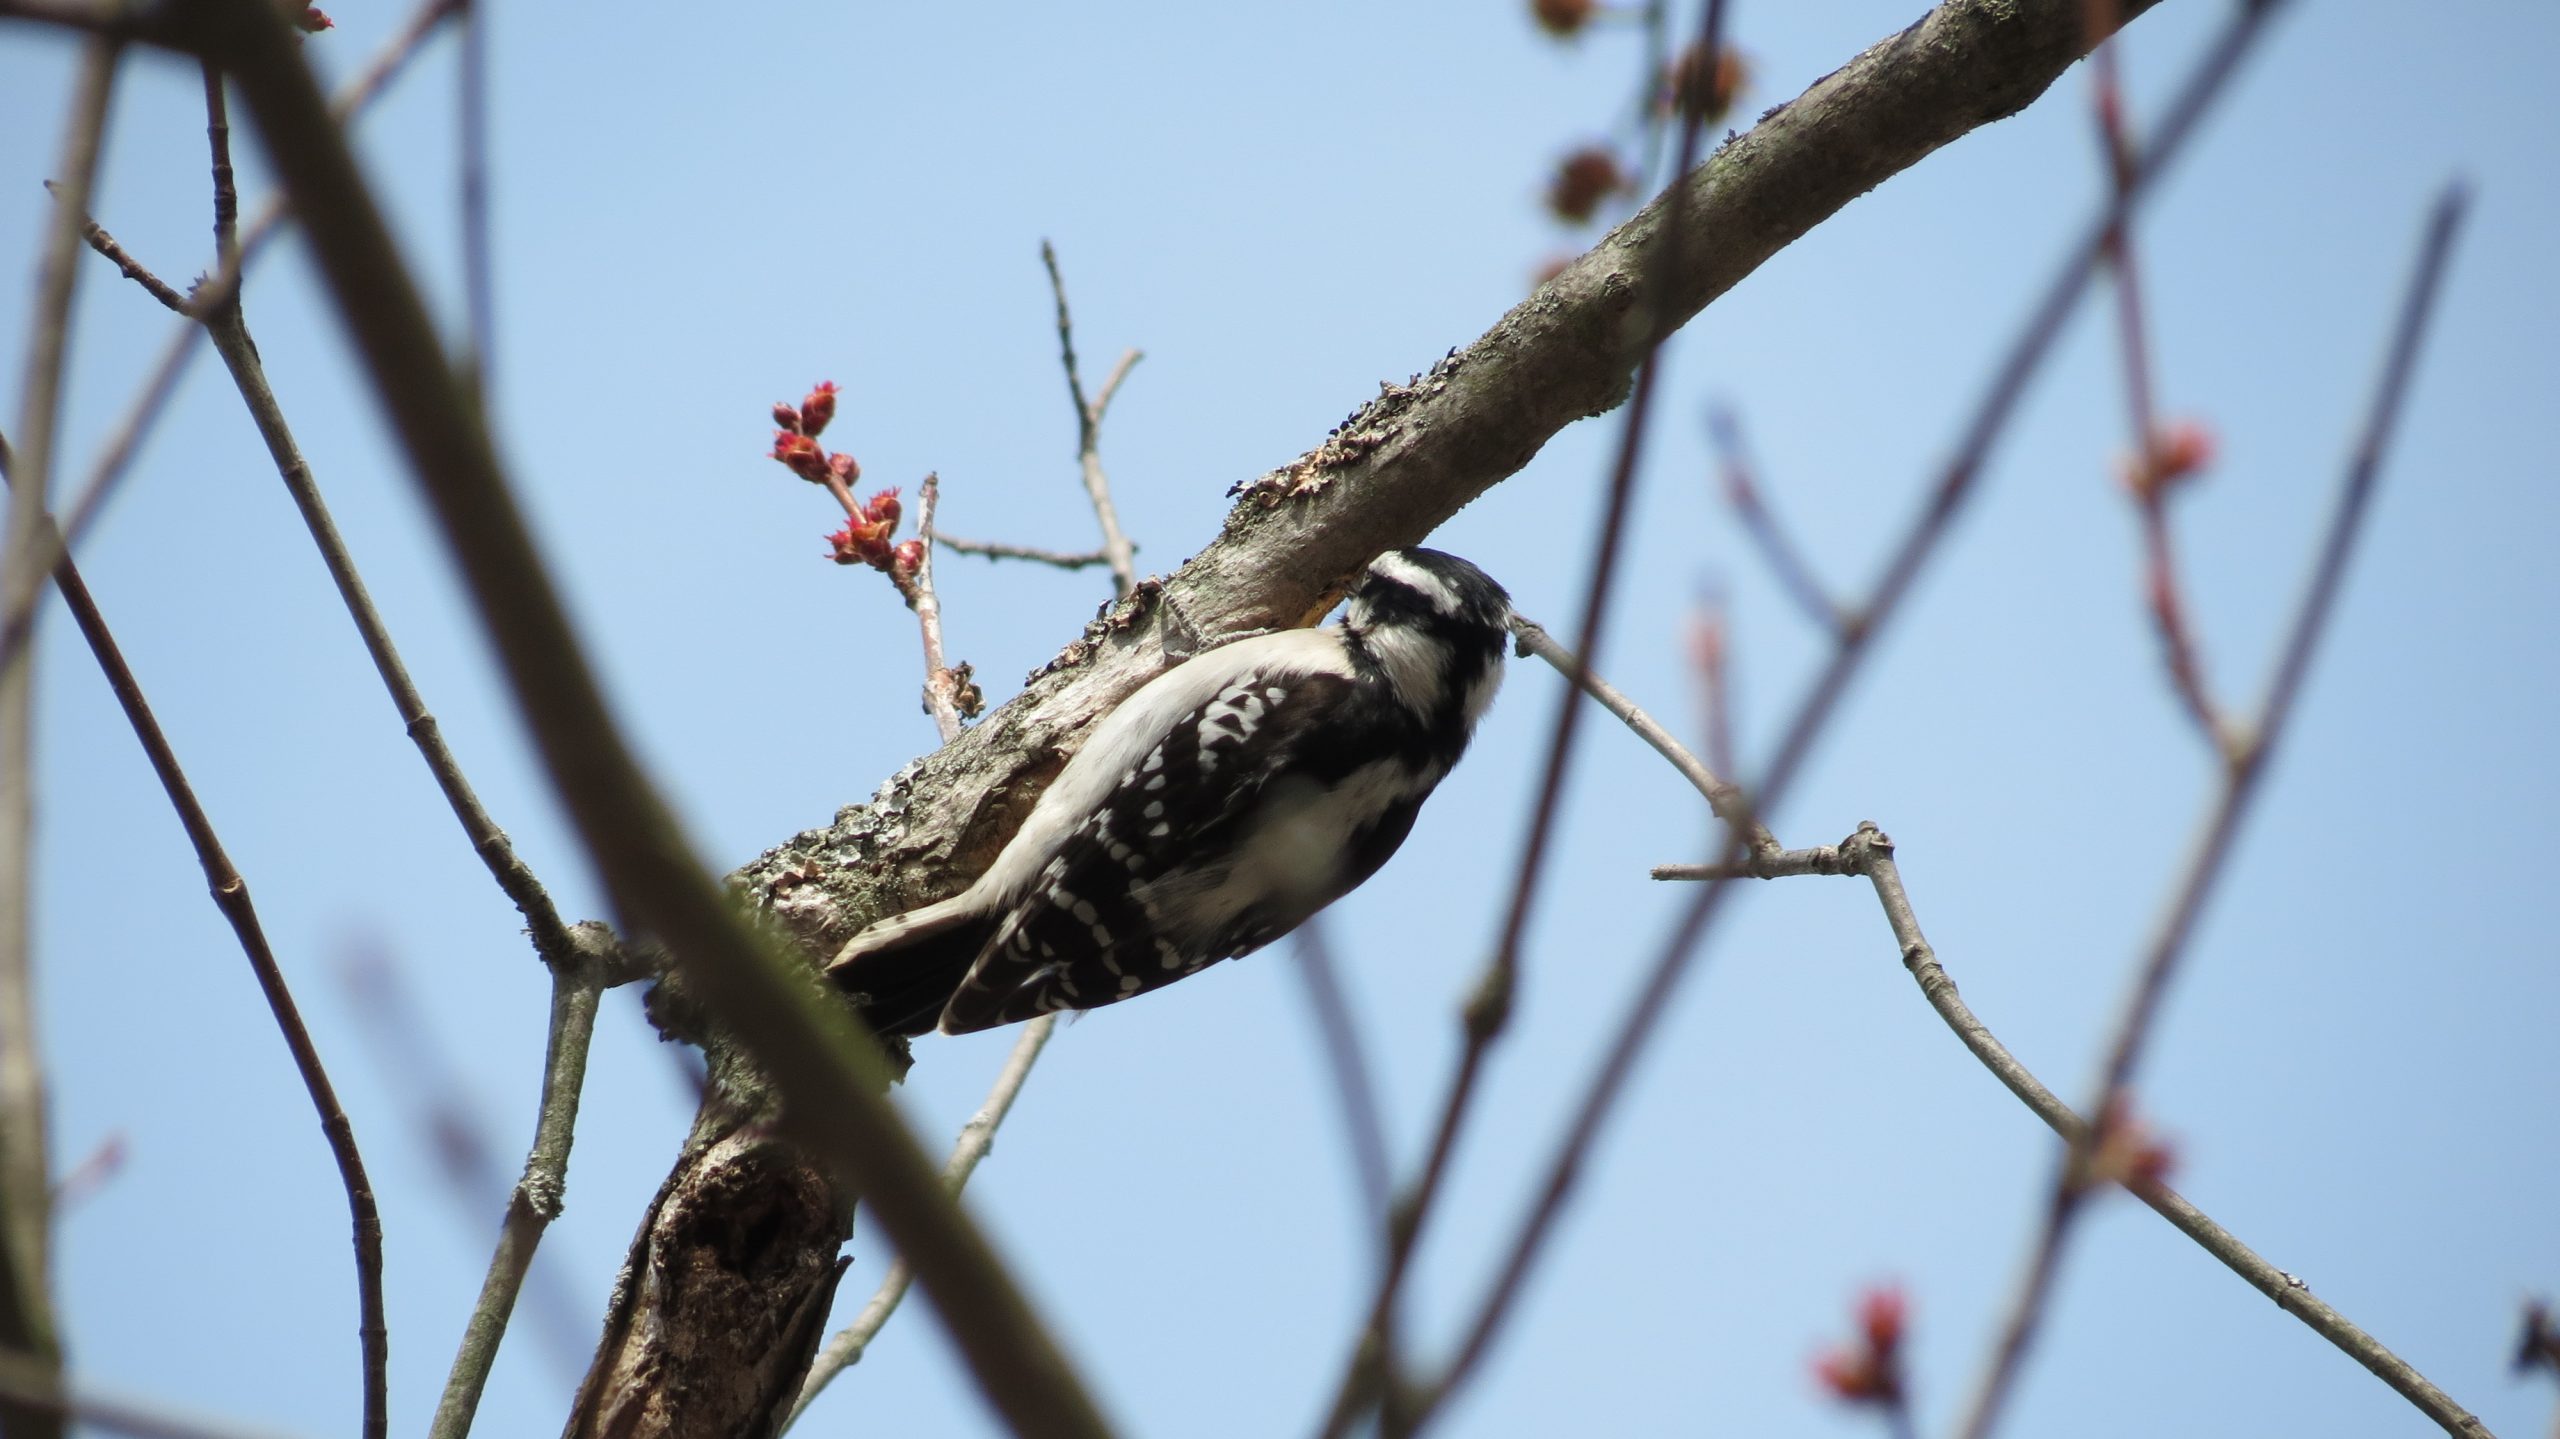 A downy woodpecker, with black and white markings, on a branch hunting for insects in Taylor Creek Park.